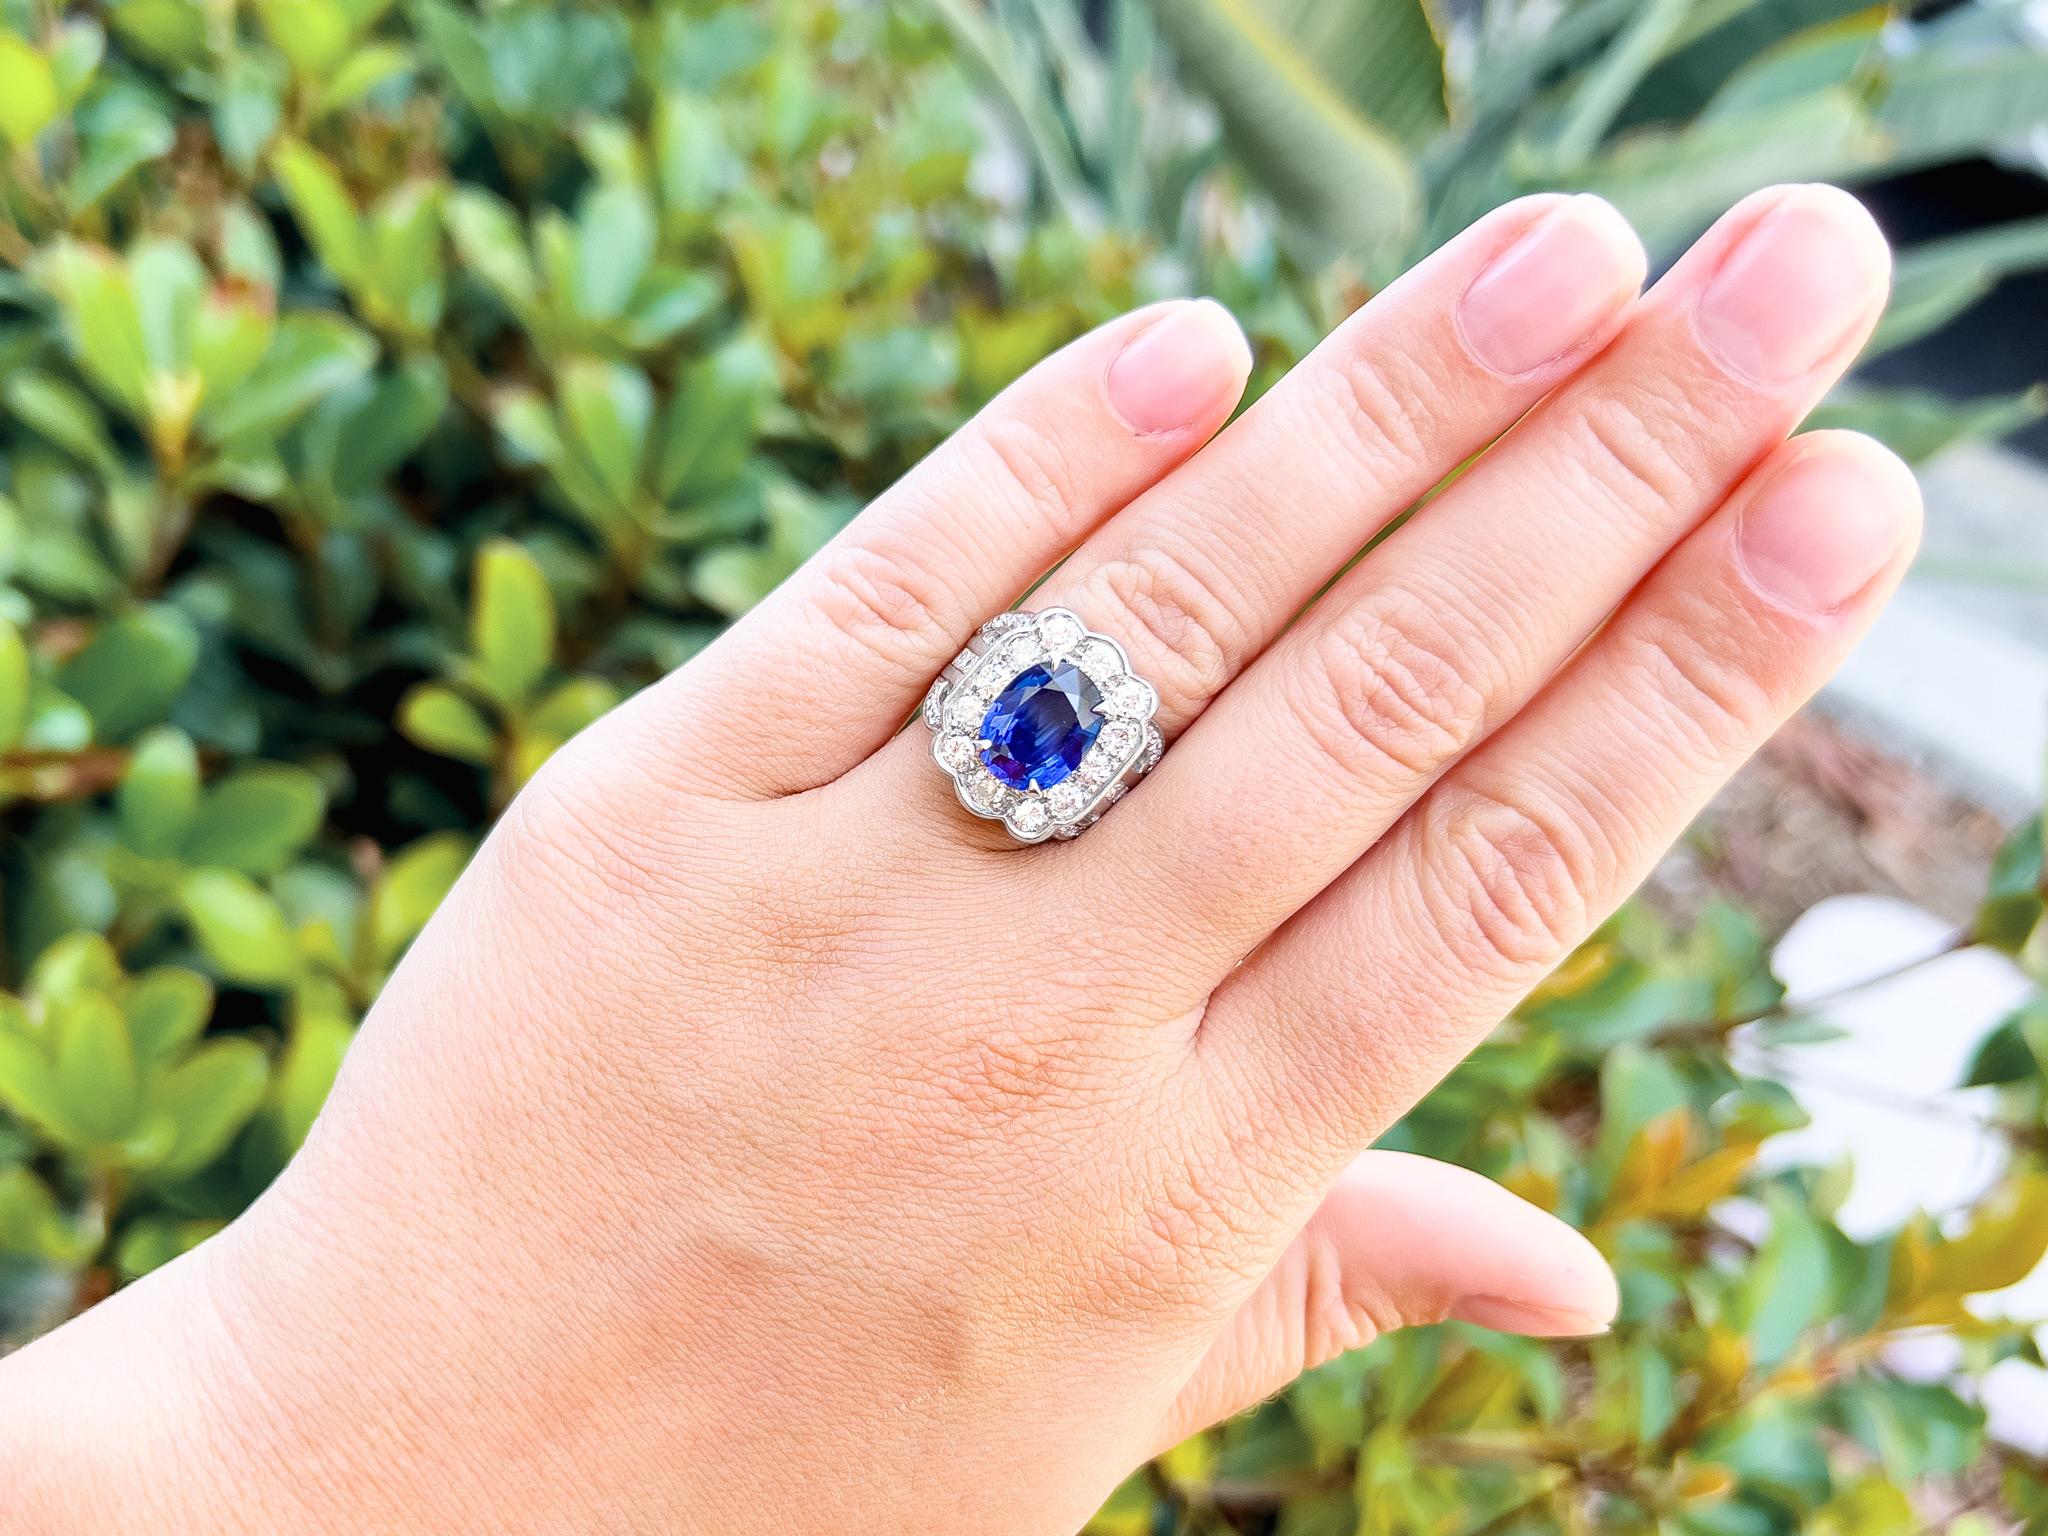 Sapphire = 4.19 Carat
Cut: Oval
Diamonds = 2.46 Carats
( Color: F, Clarity: VS )
Metal: 18K Gold
Ring Size: 6* US
*It can be resized complimentary